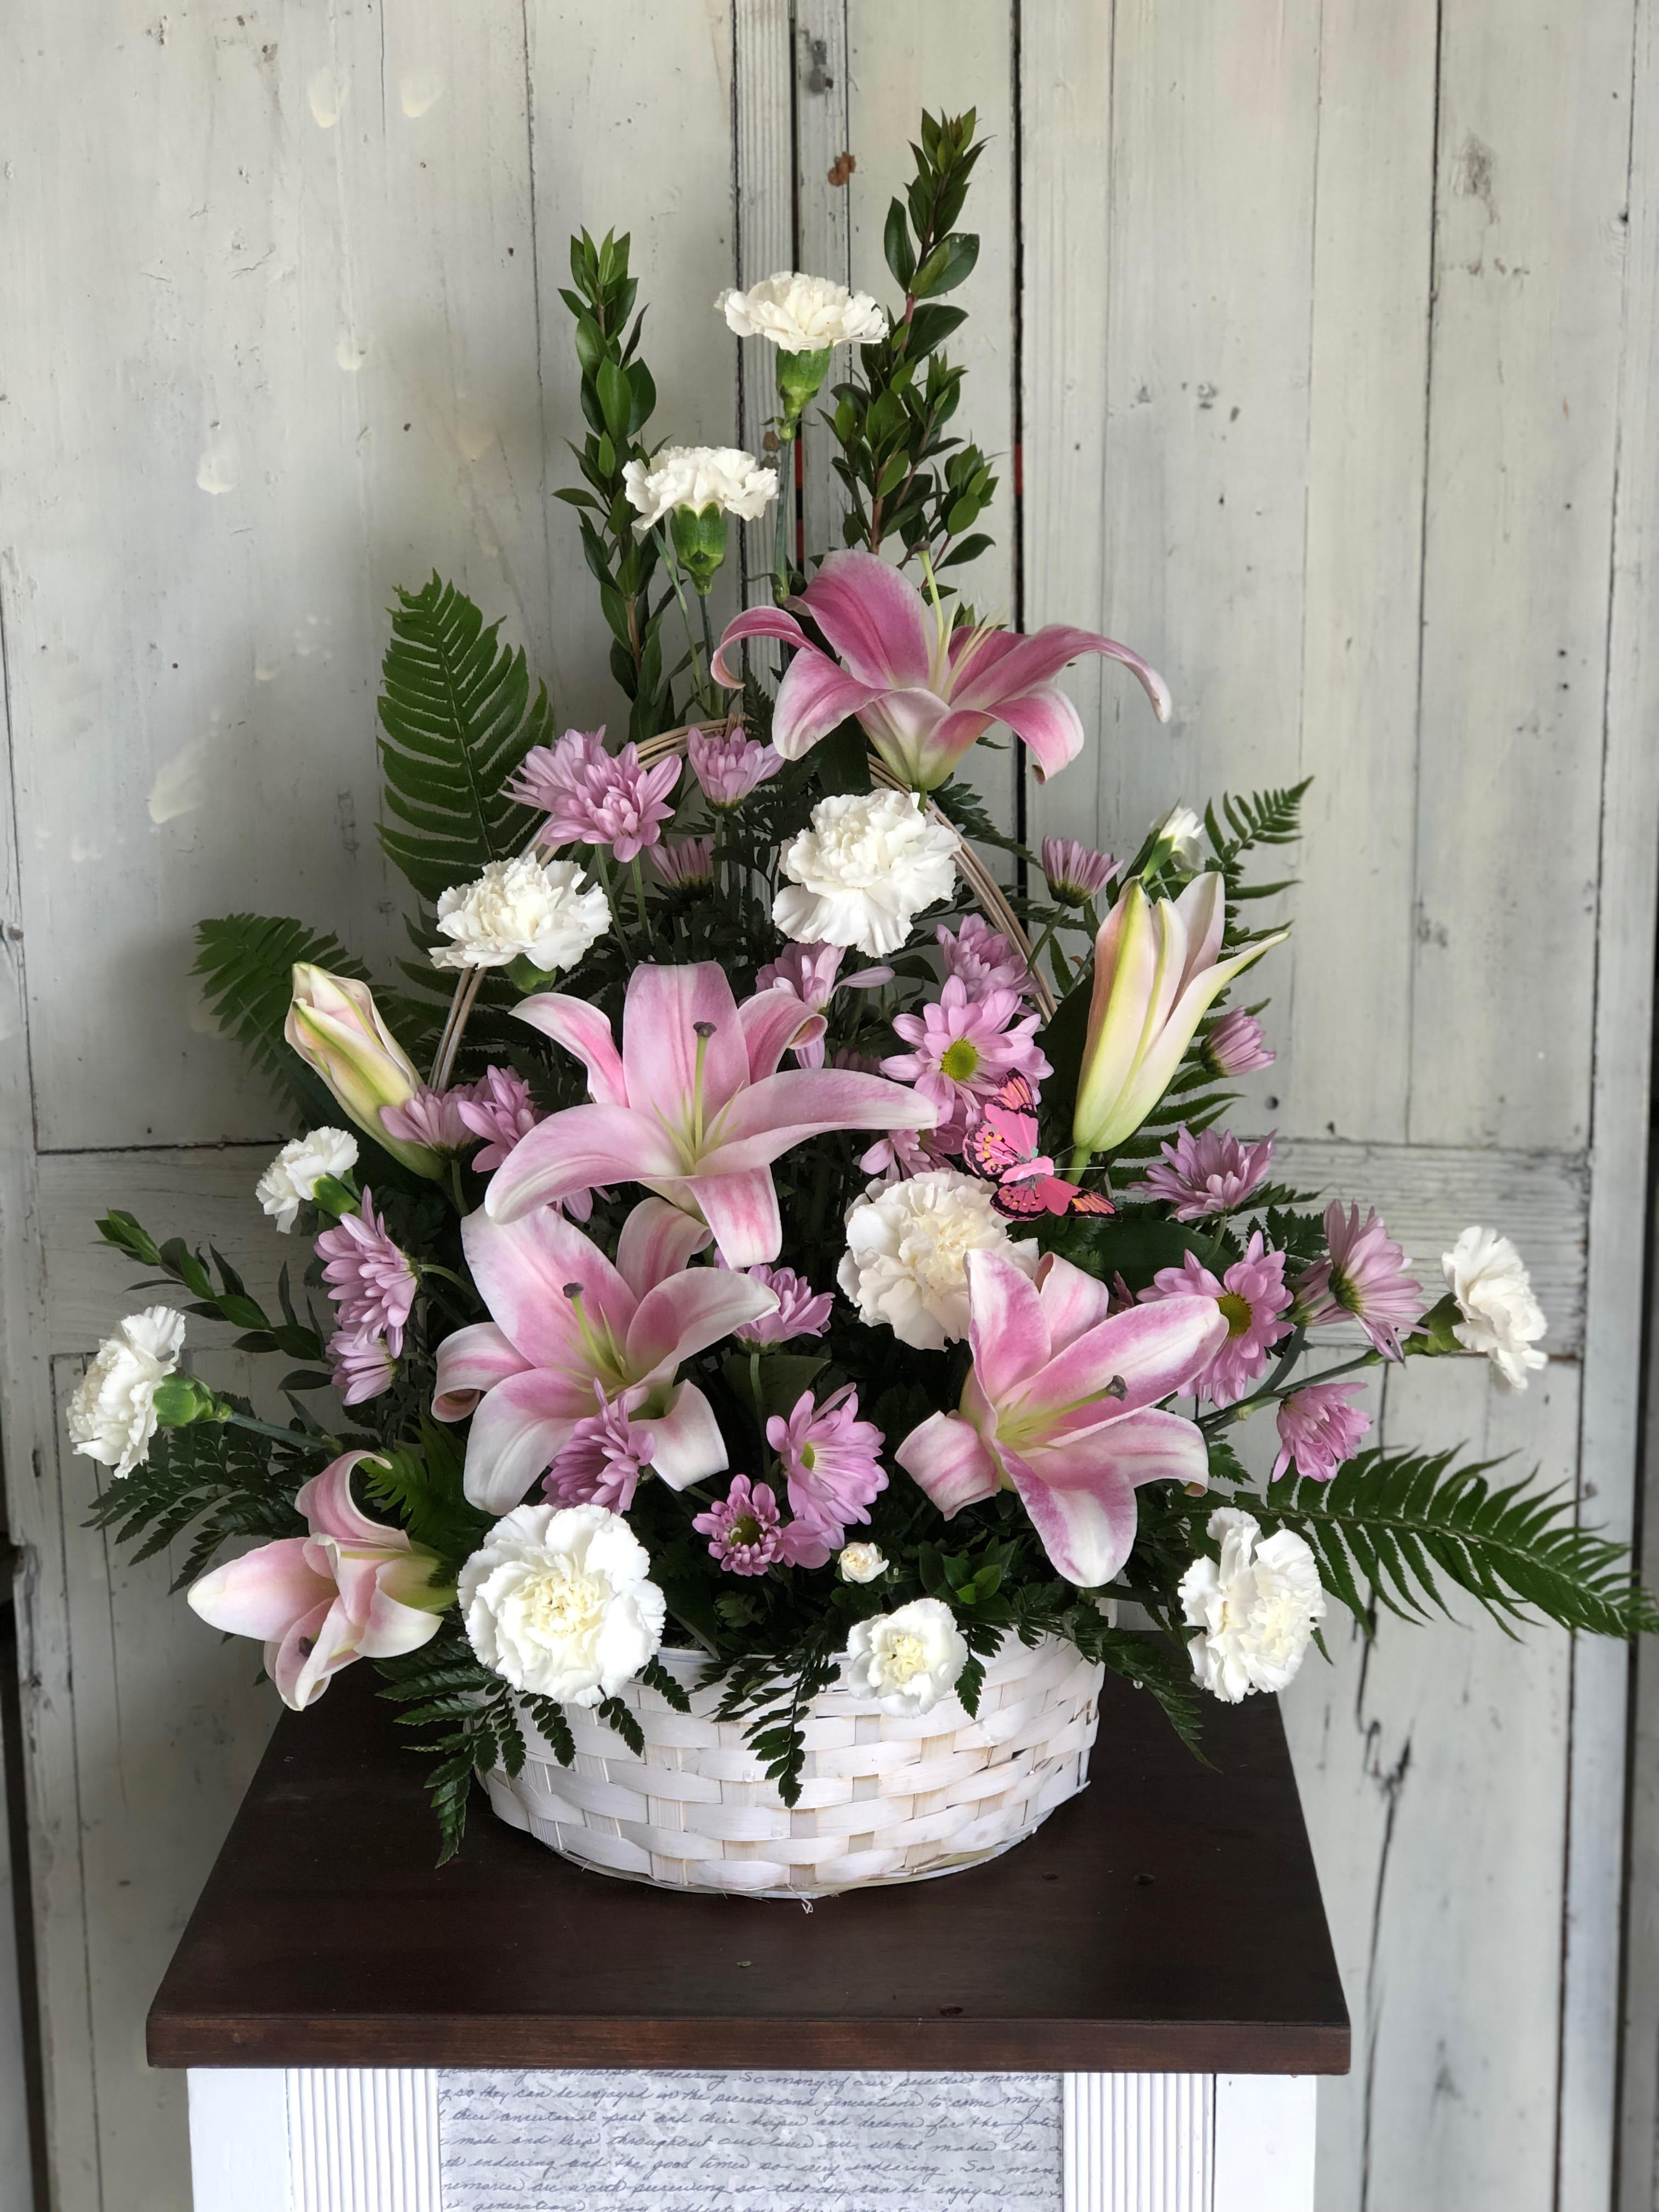 Peaceful Pastels Lilies Basket in Waldorf, MD Country Florist